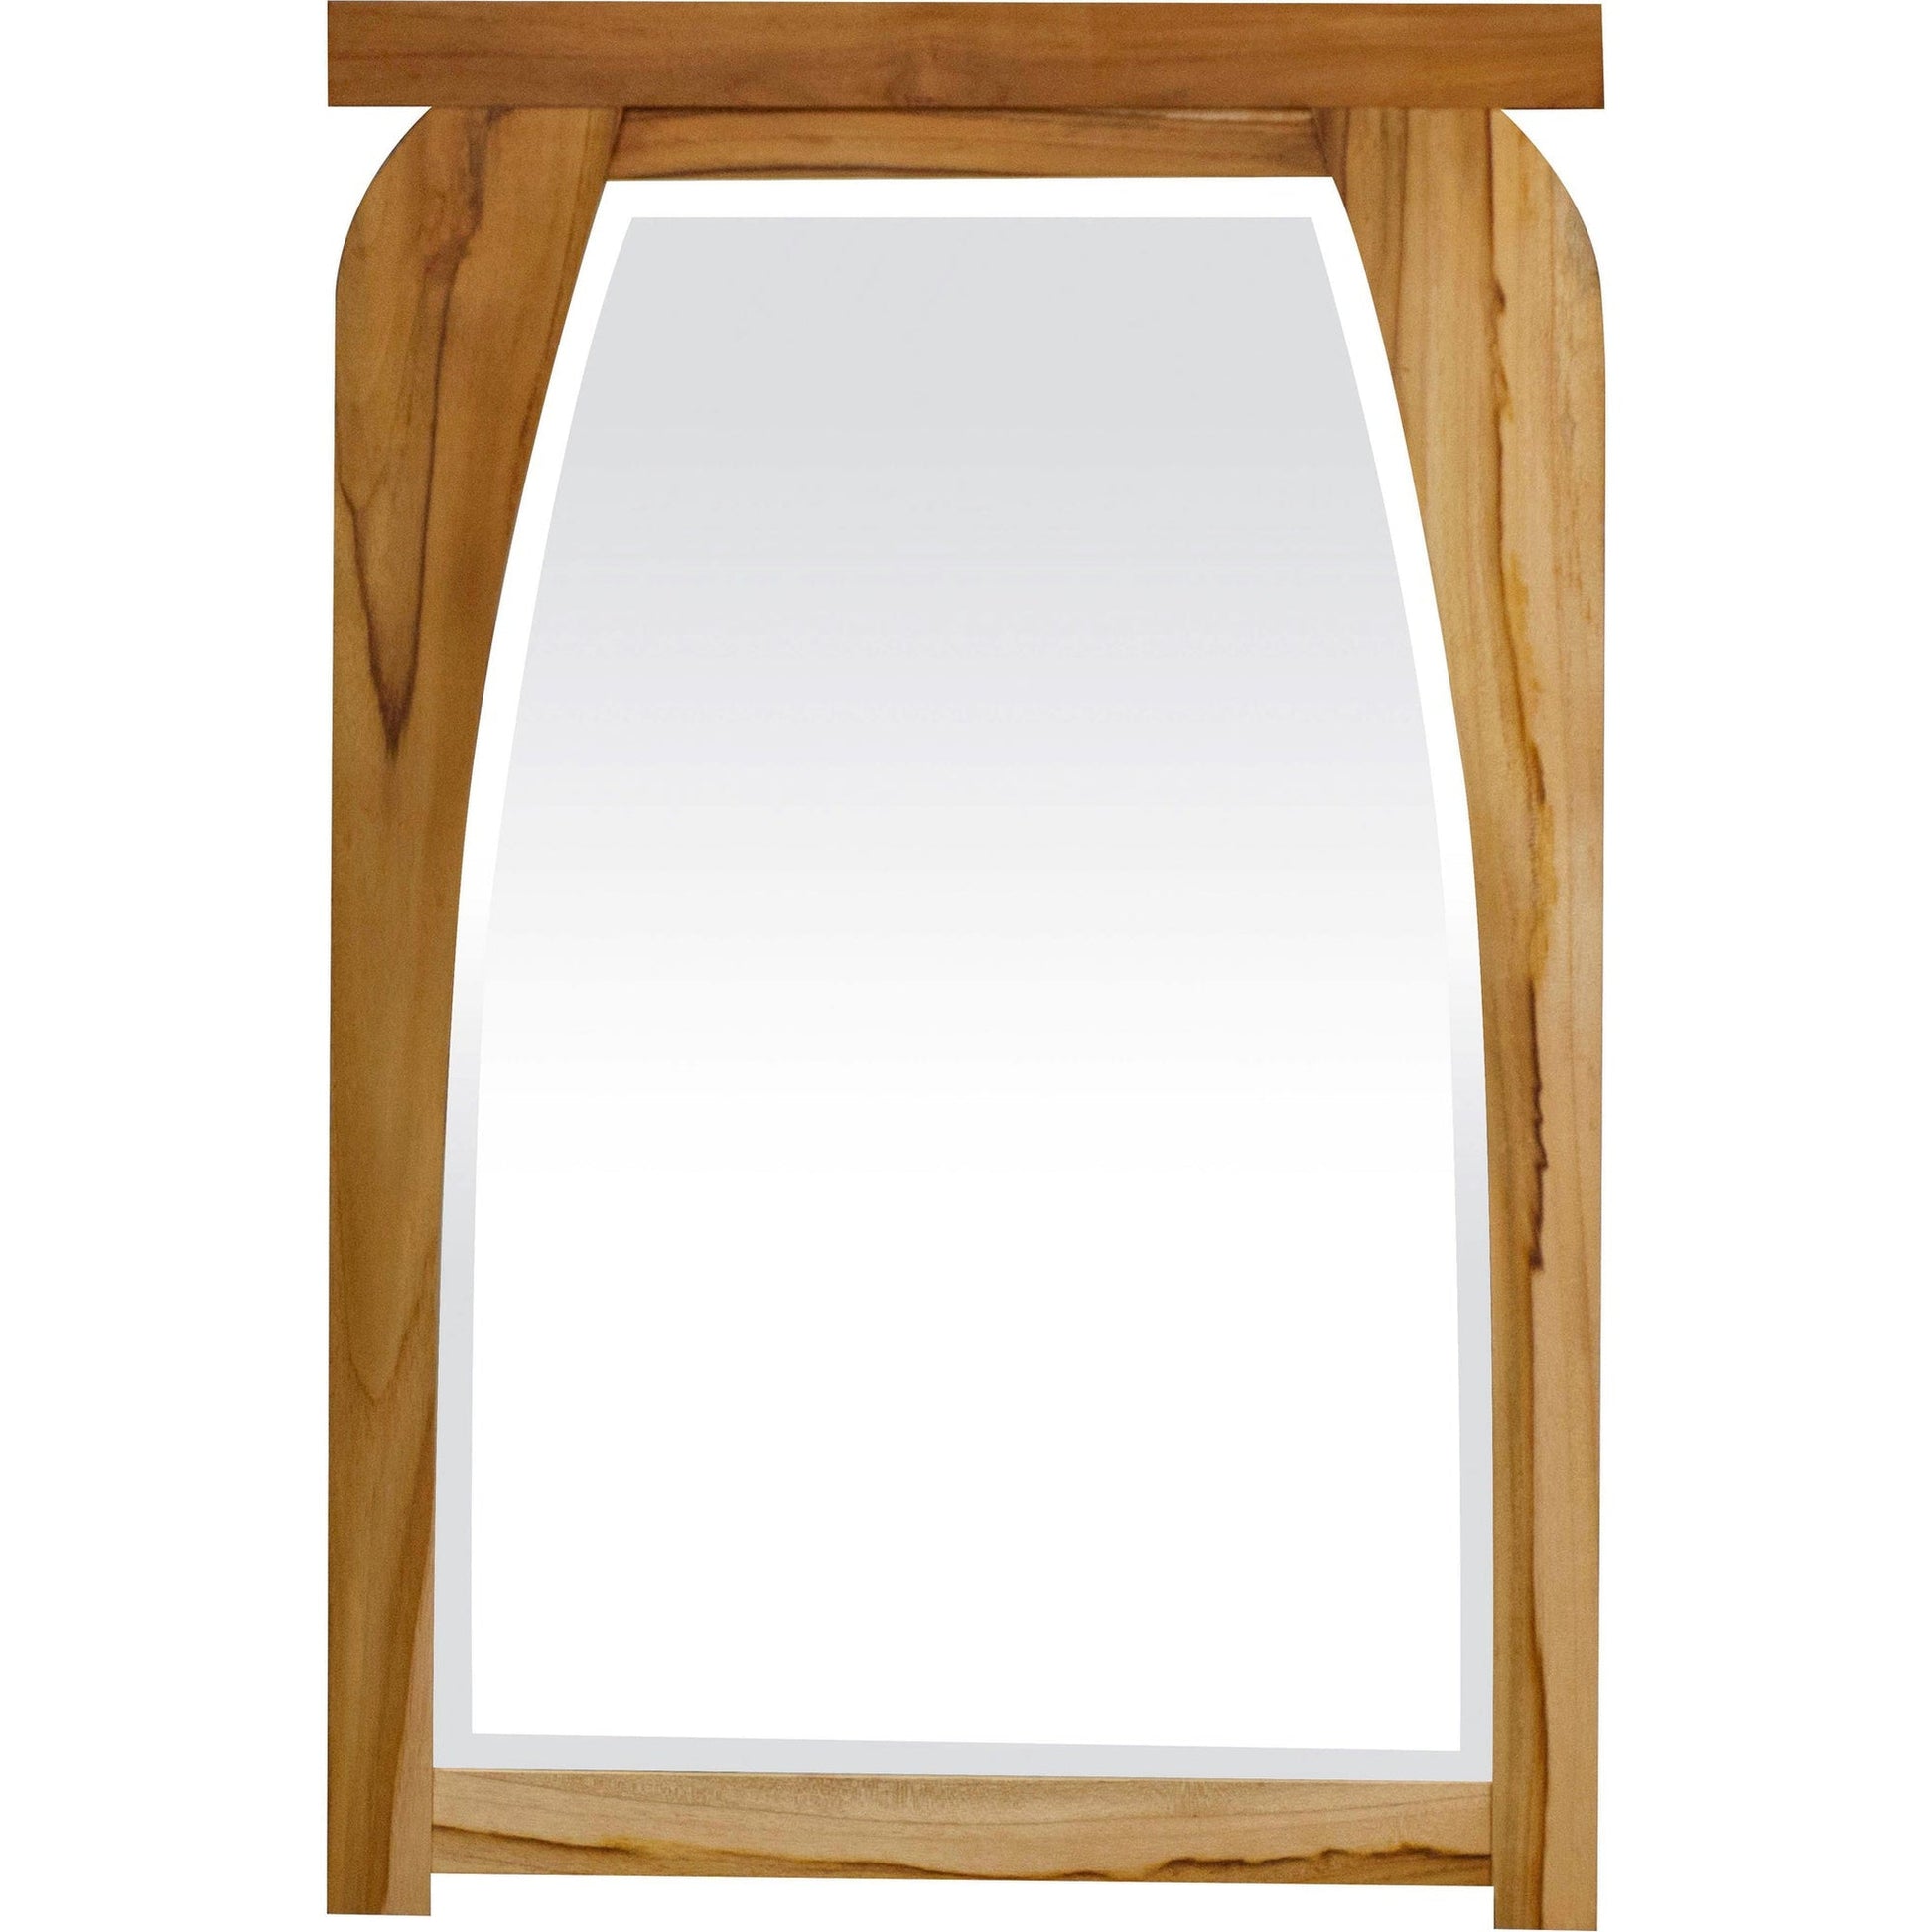 EcoDecors Tranquility 24" x 35" EarthyTeak Solid Teak Wood Wall Mirror